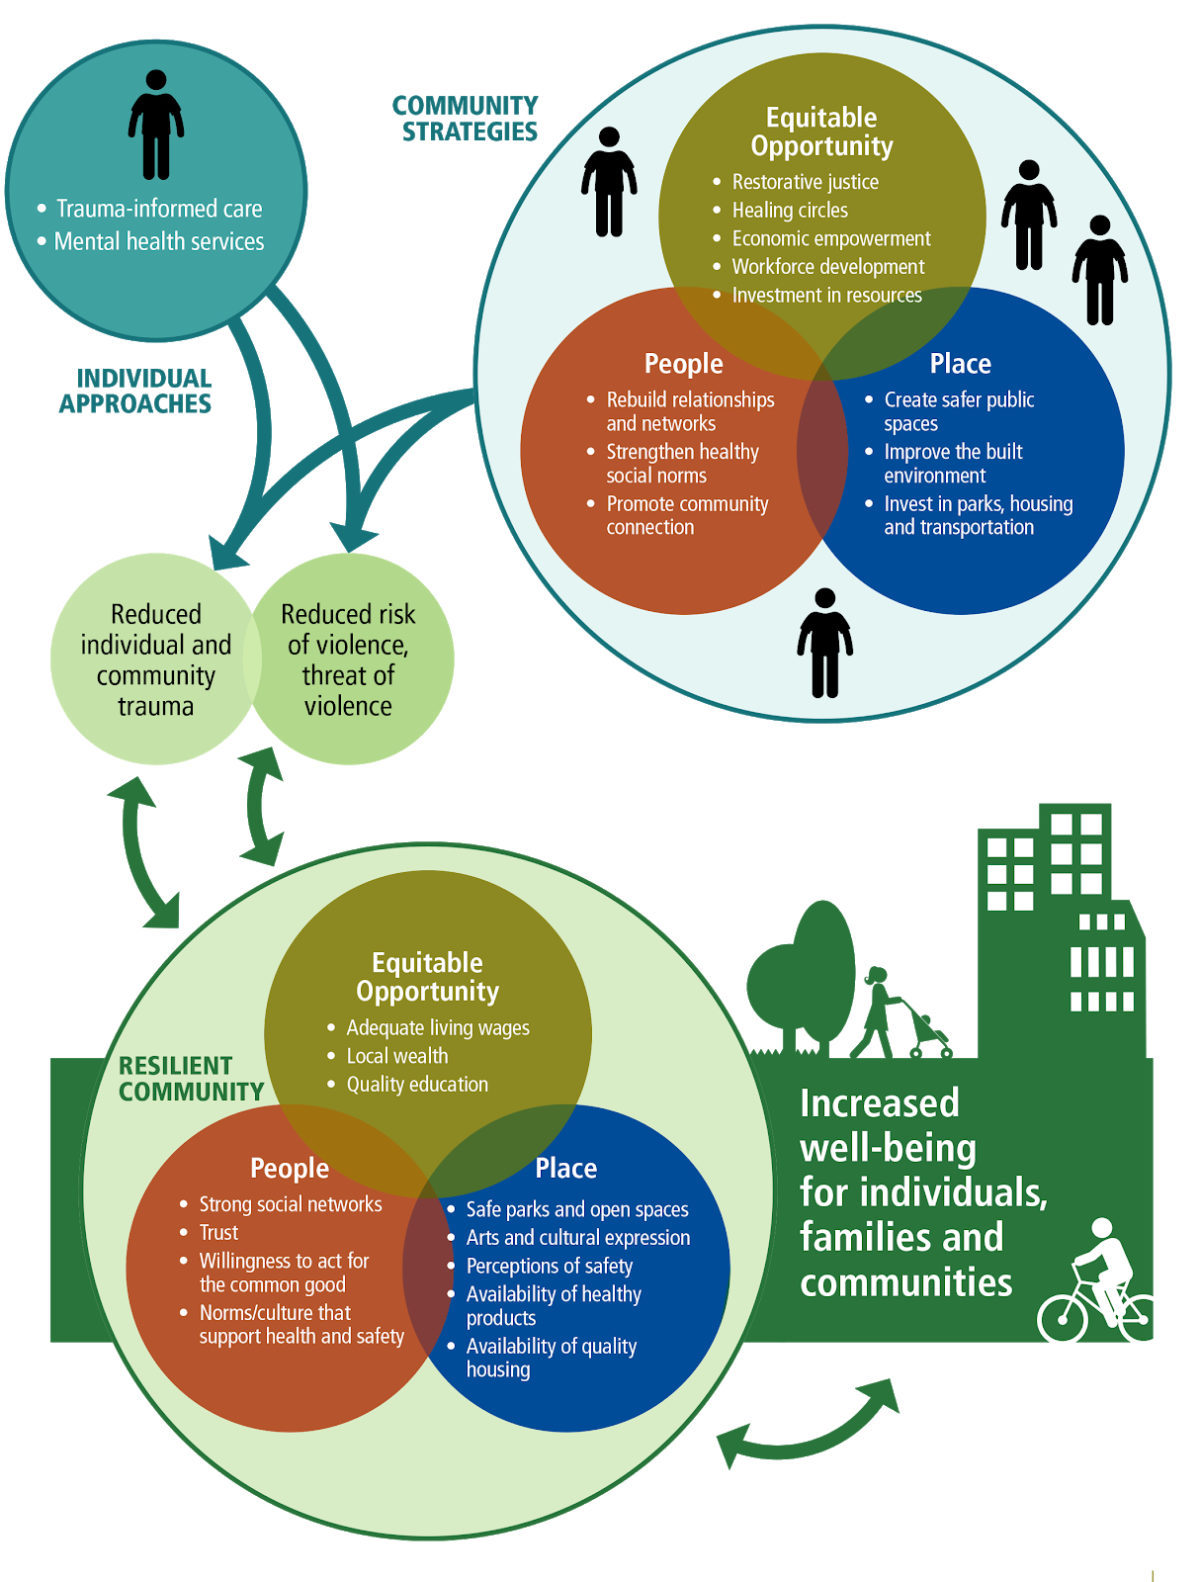 This illustration from Prevention Institute's Adverse Community Experiences and Resilience Framework depicts the individual and community-based strategies that can be used to build more resilient communities.